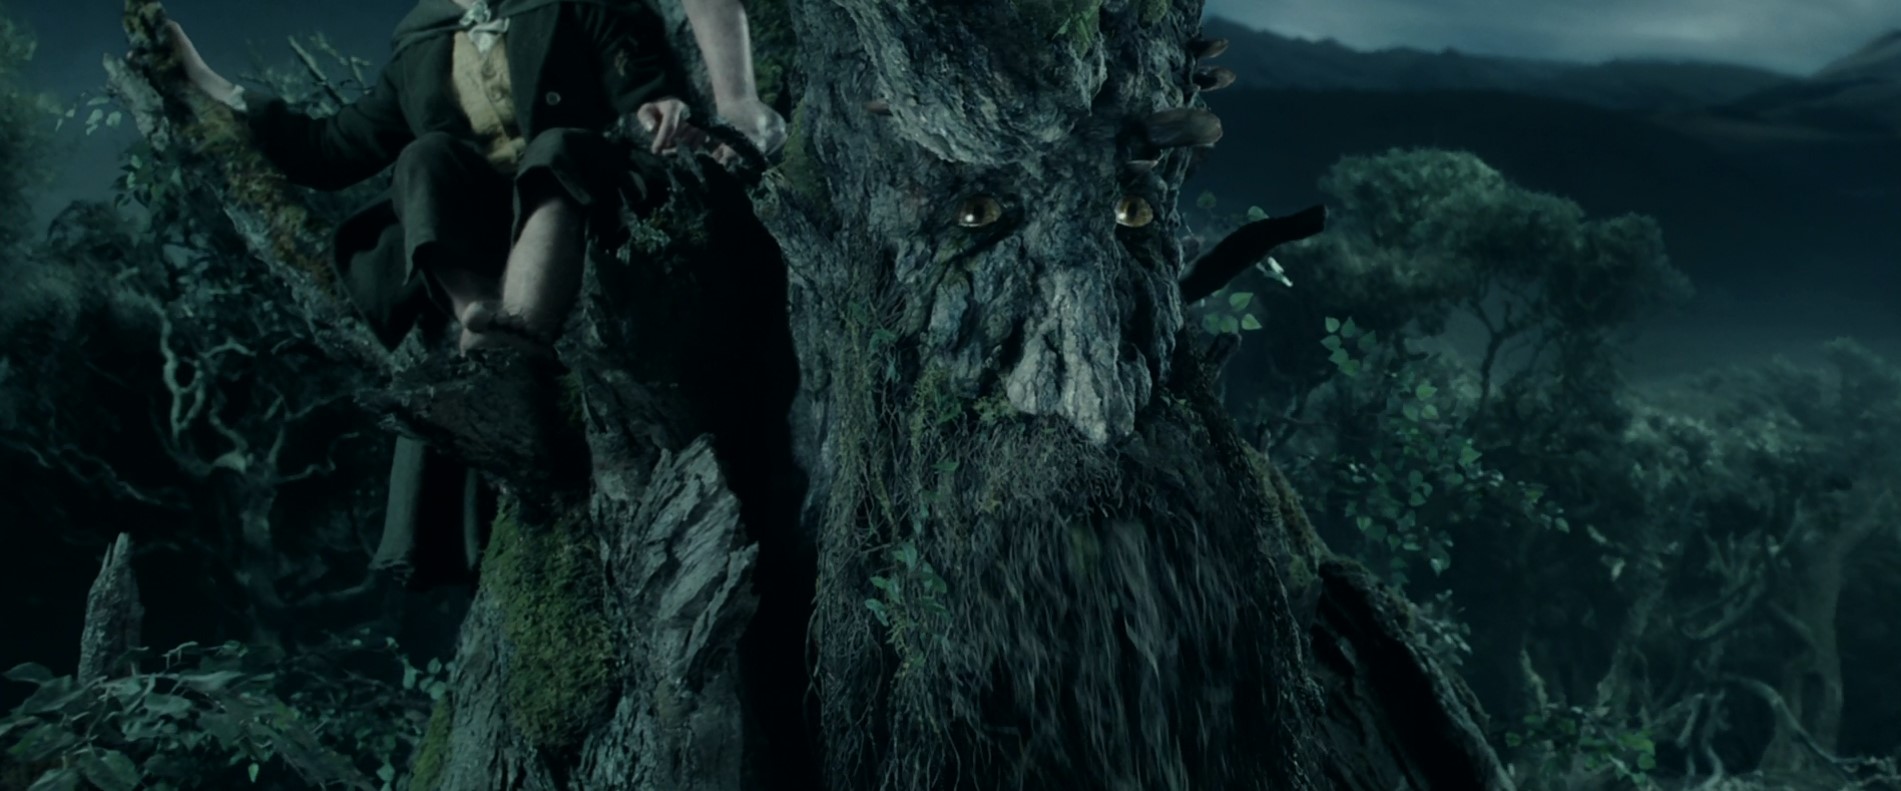 Treebeard 3 Quotes By Character